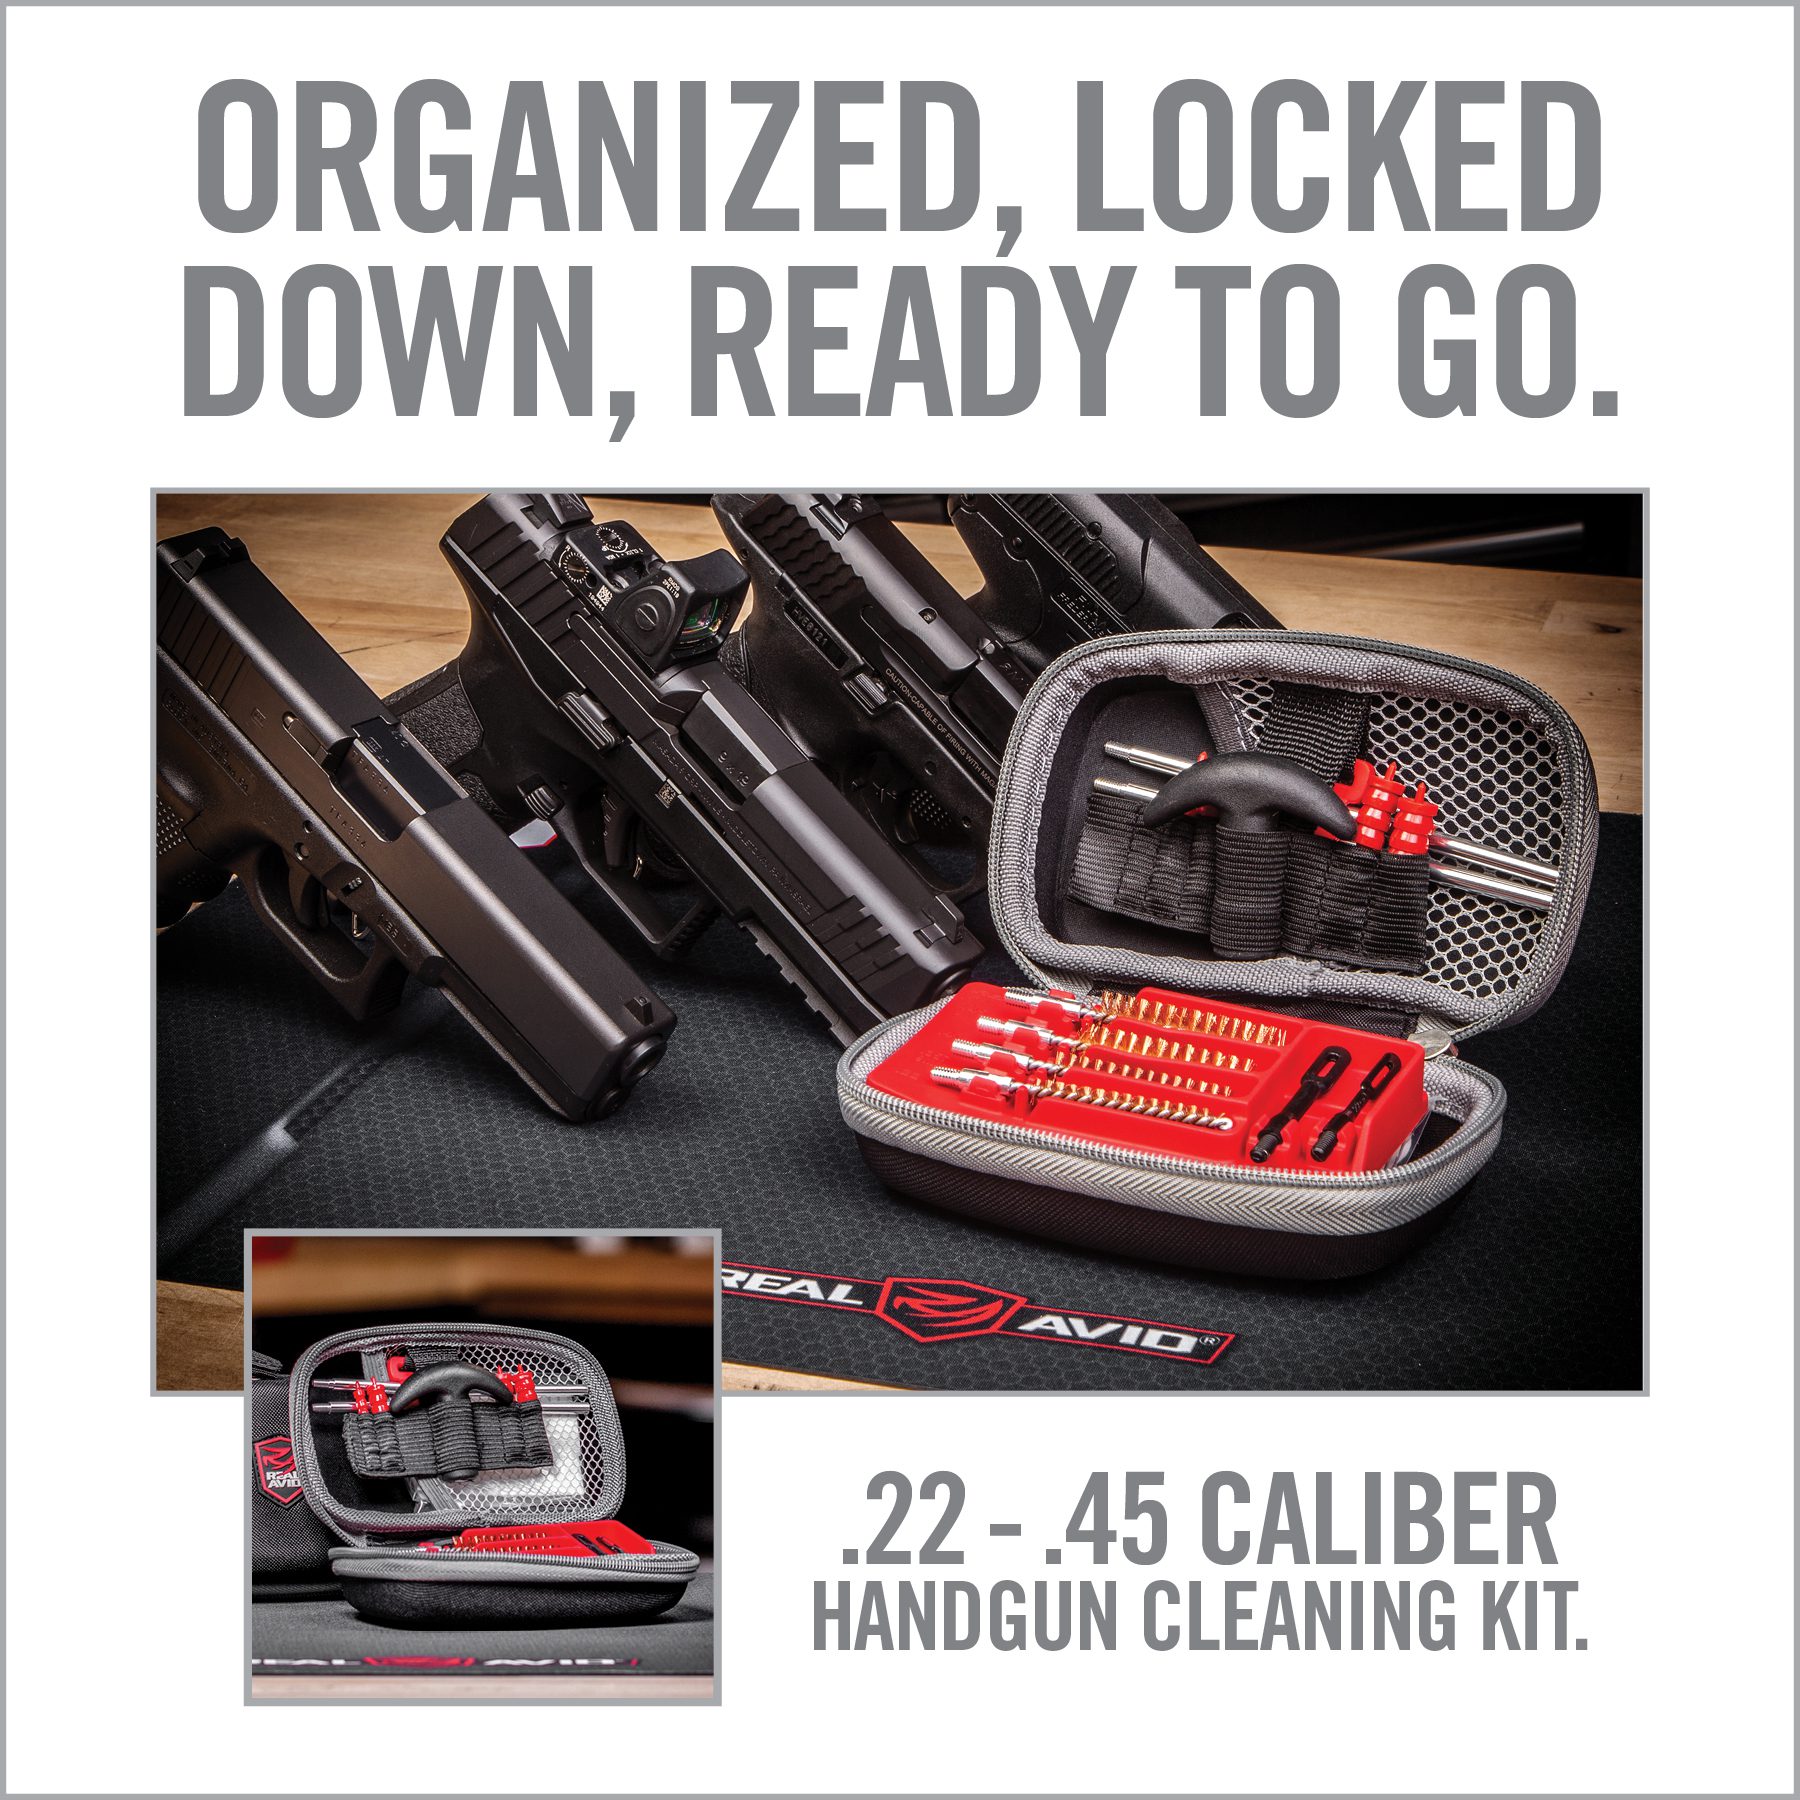 the gun cleaning kit is organized and ready to go